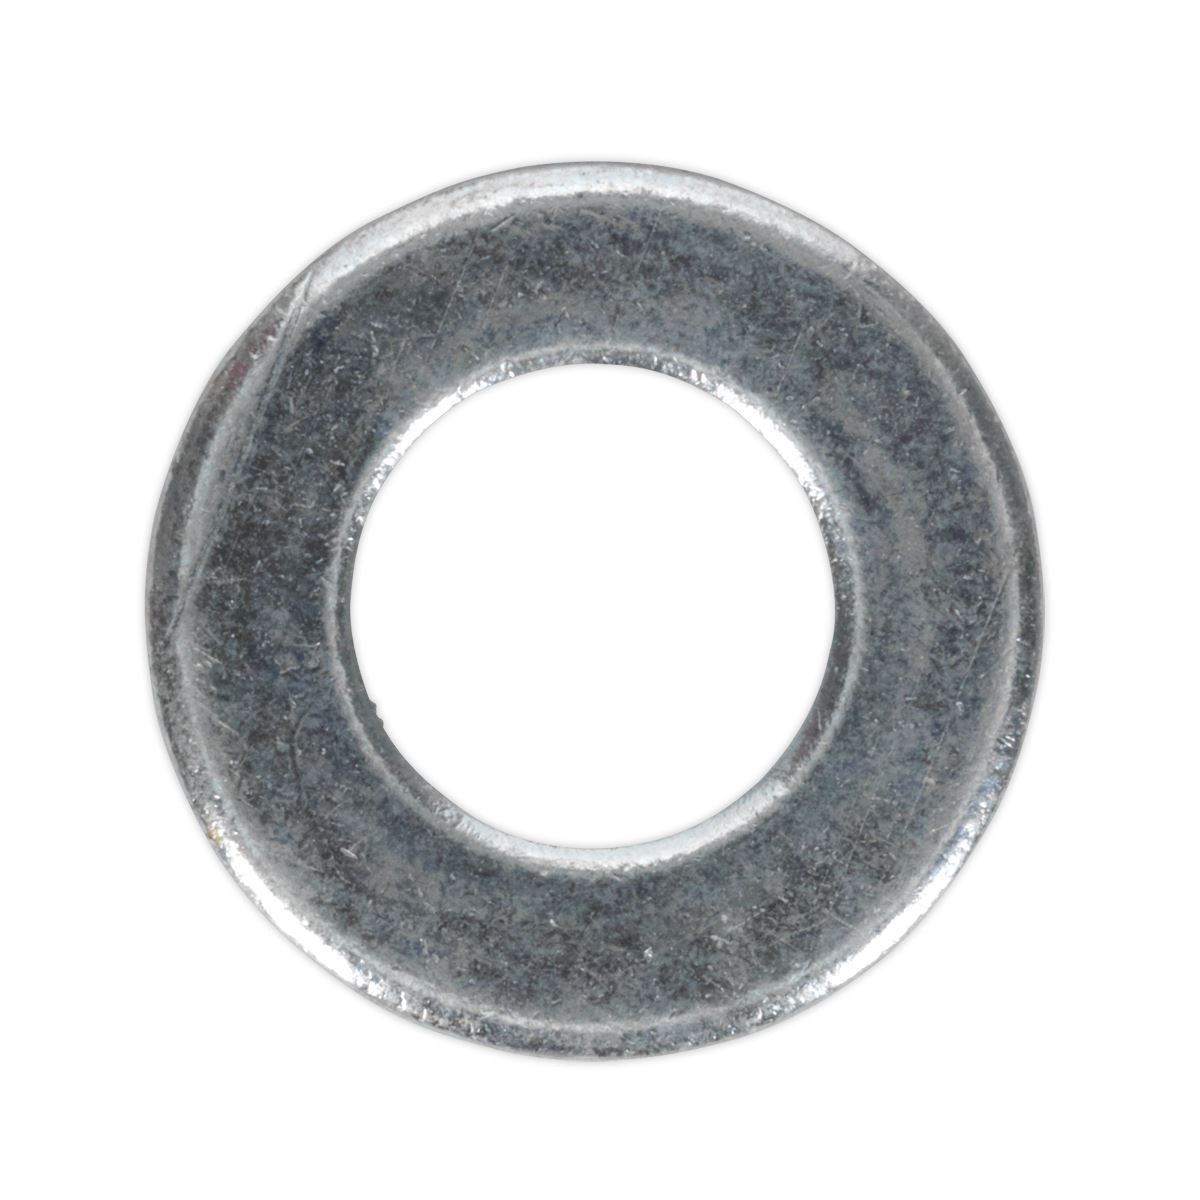 Sealey Flat Washer DIN 125 M10 x 21mm Form A Zinc Pack of 100